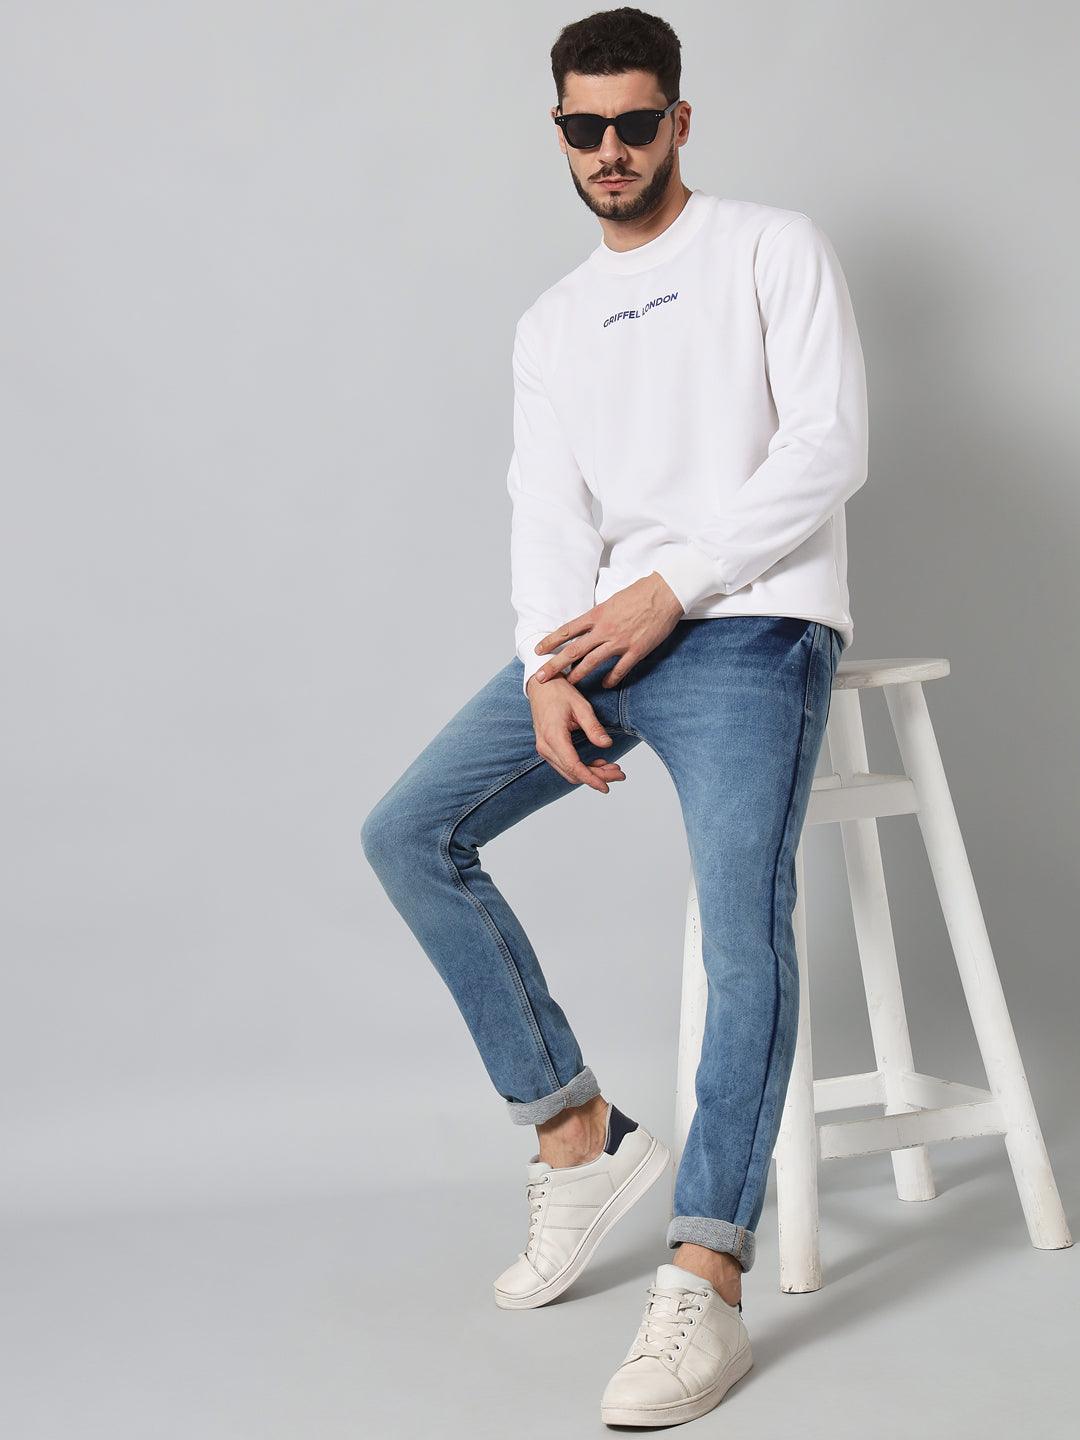 Griffel Men's Cotton Fleece Round Neck White Sweatshirt with Full Sleeve and Front Logo Print - griffel